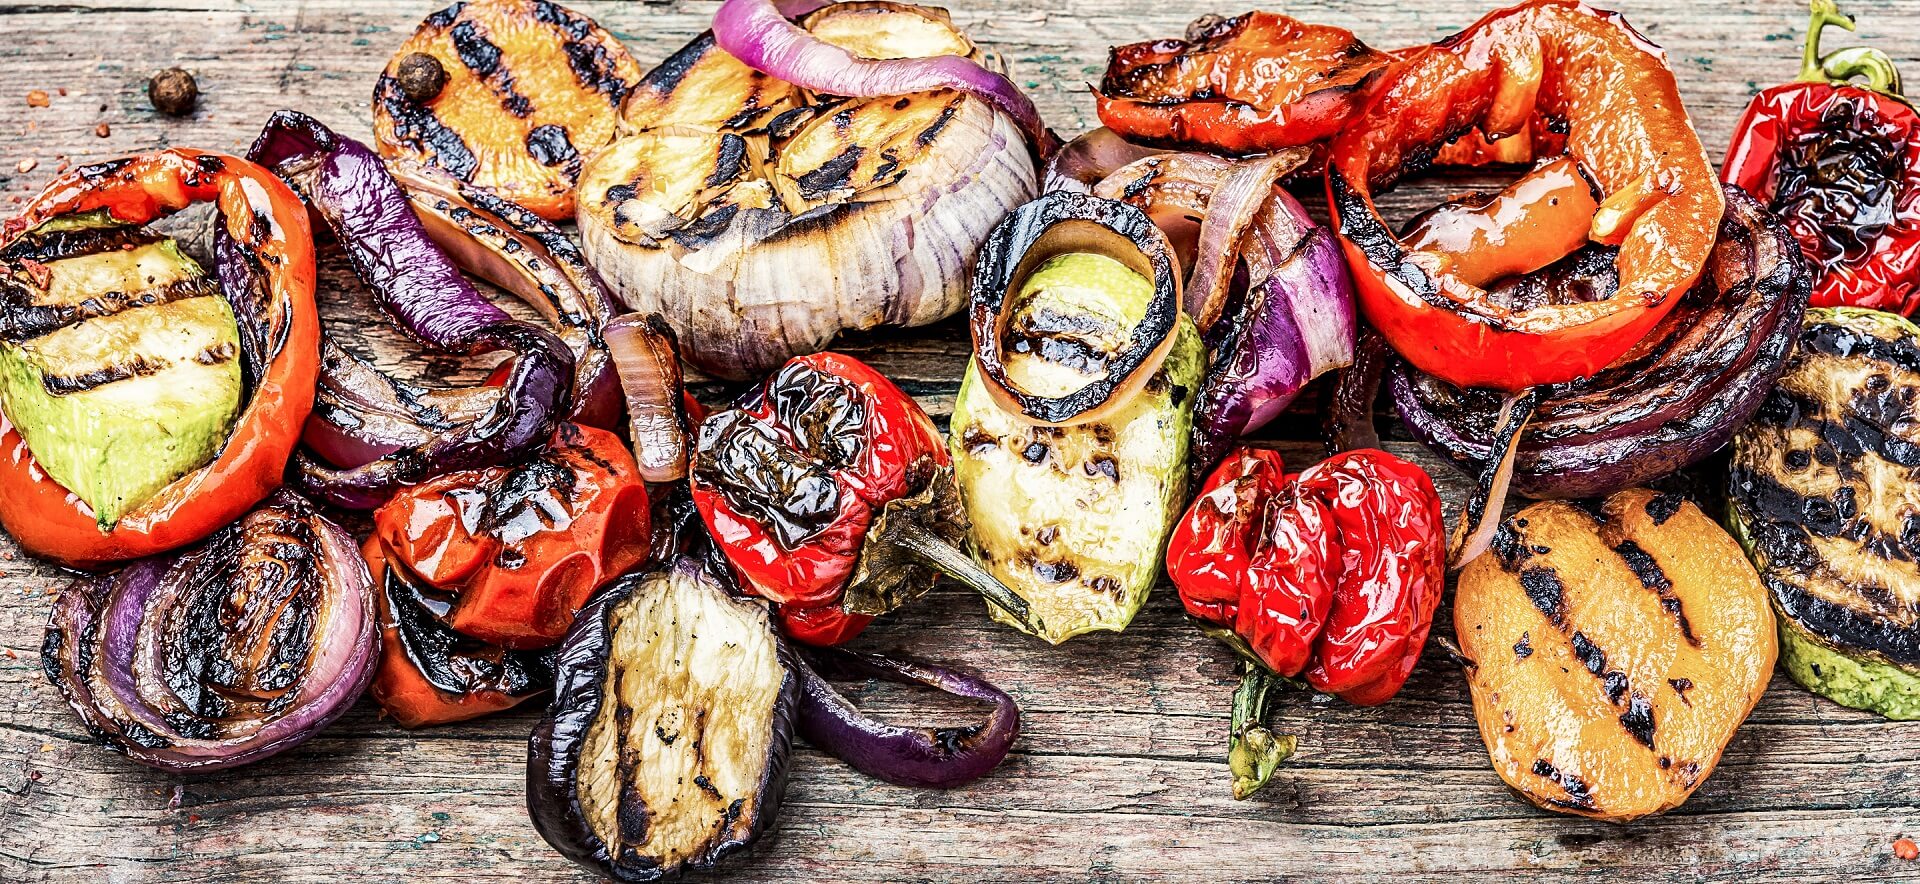 Mixed grilled vegetables sustainably produced from leftovers